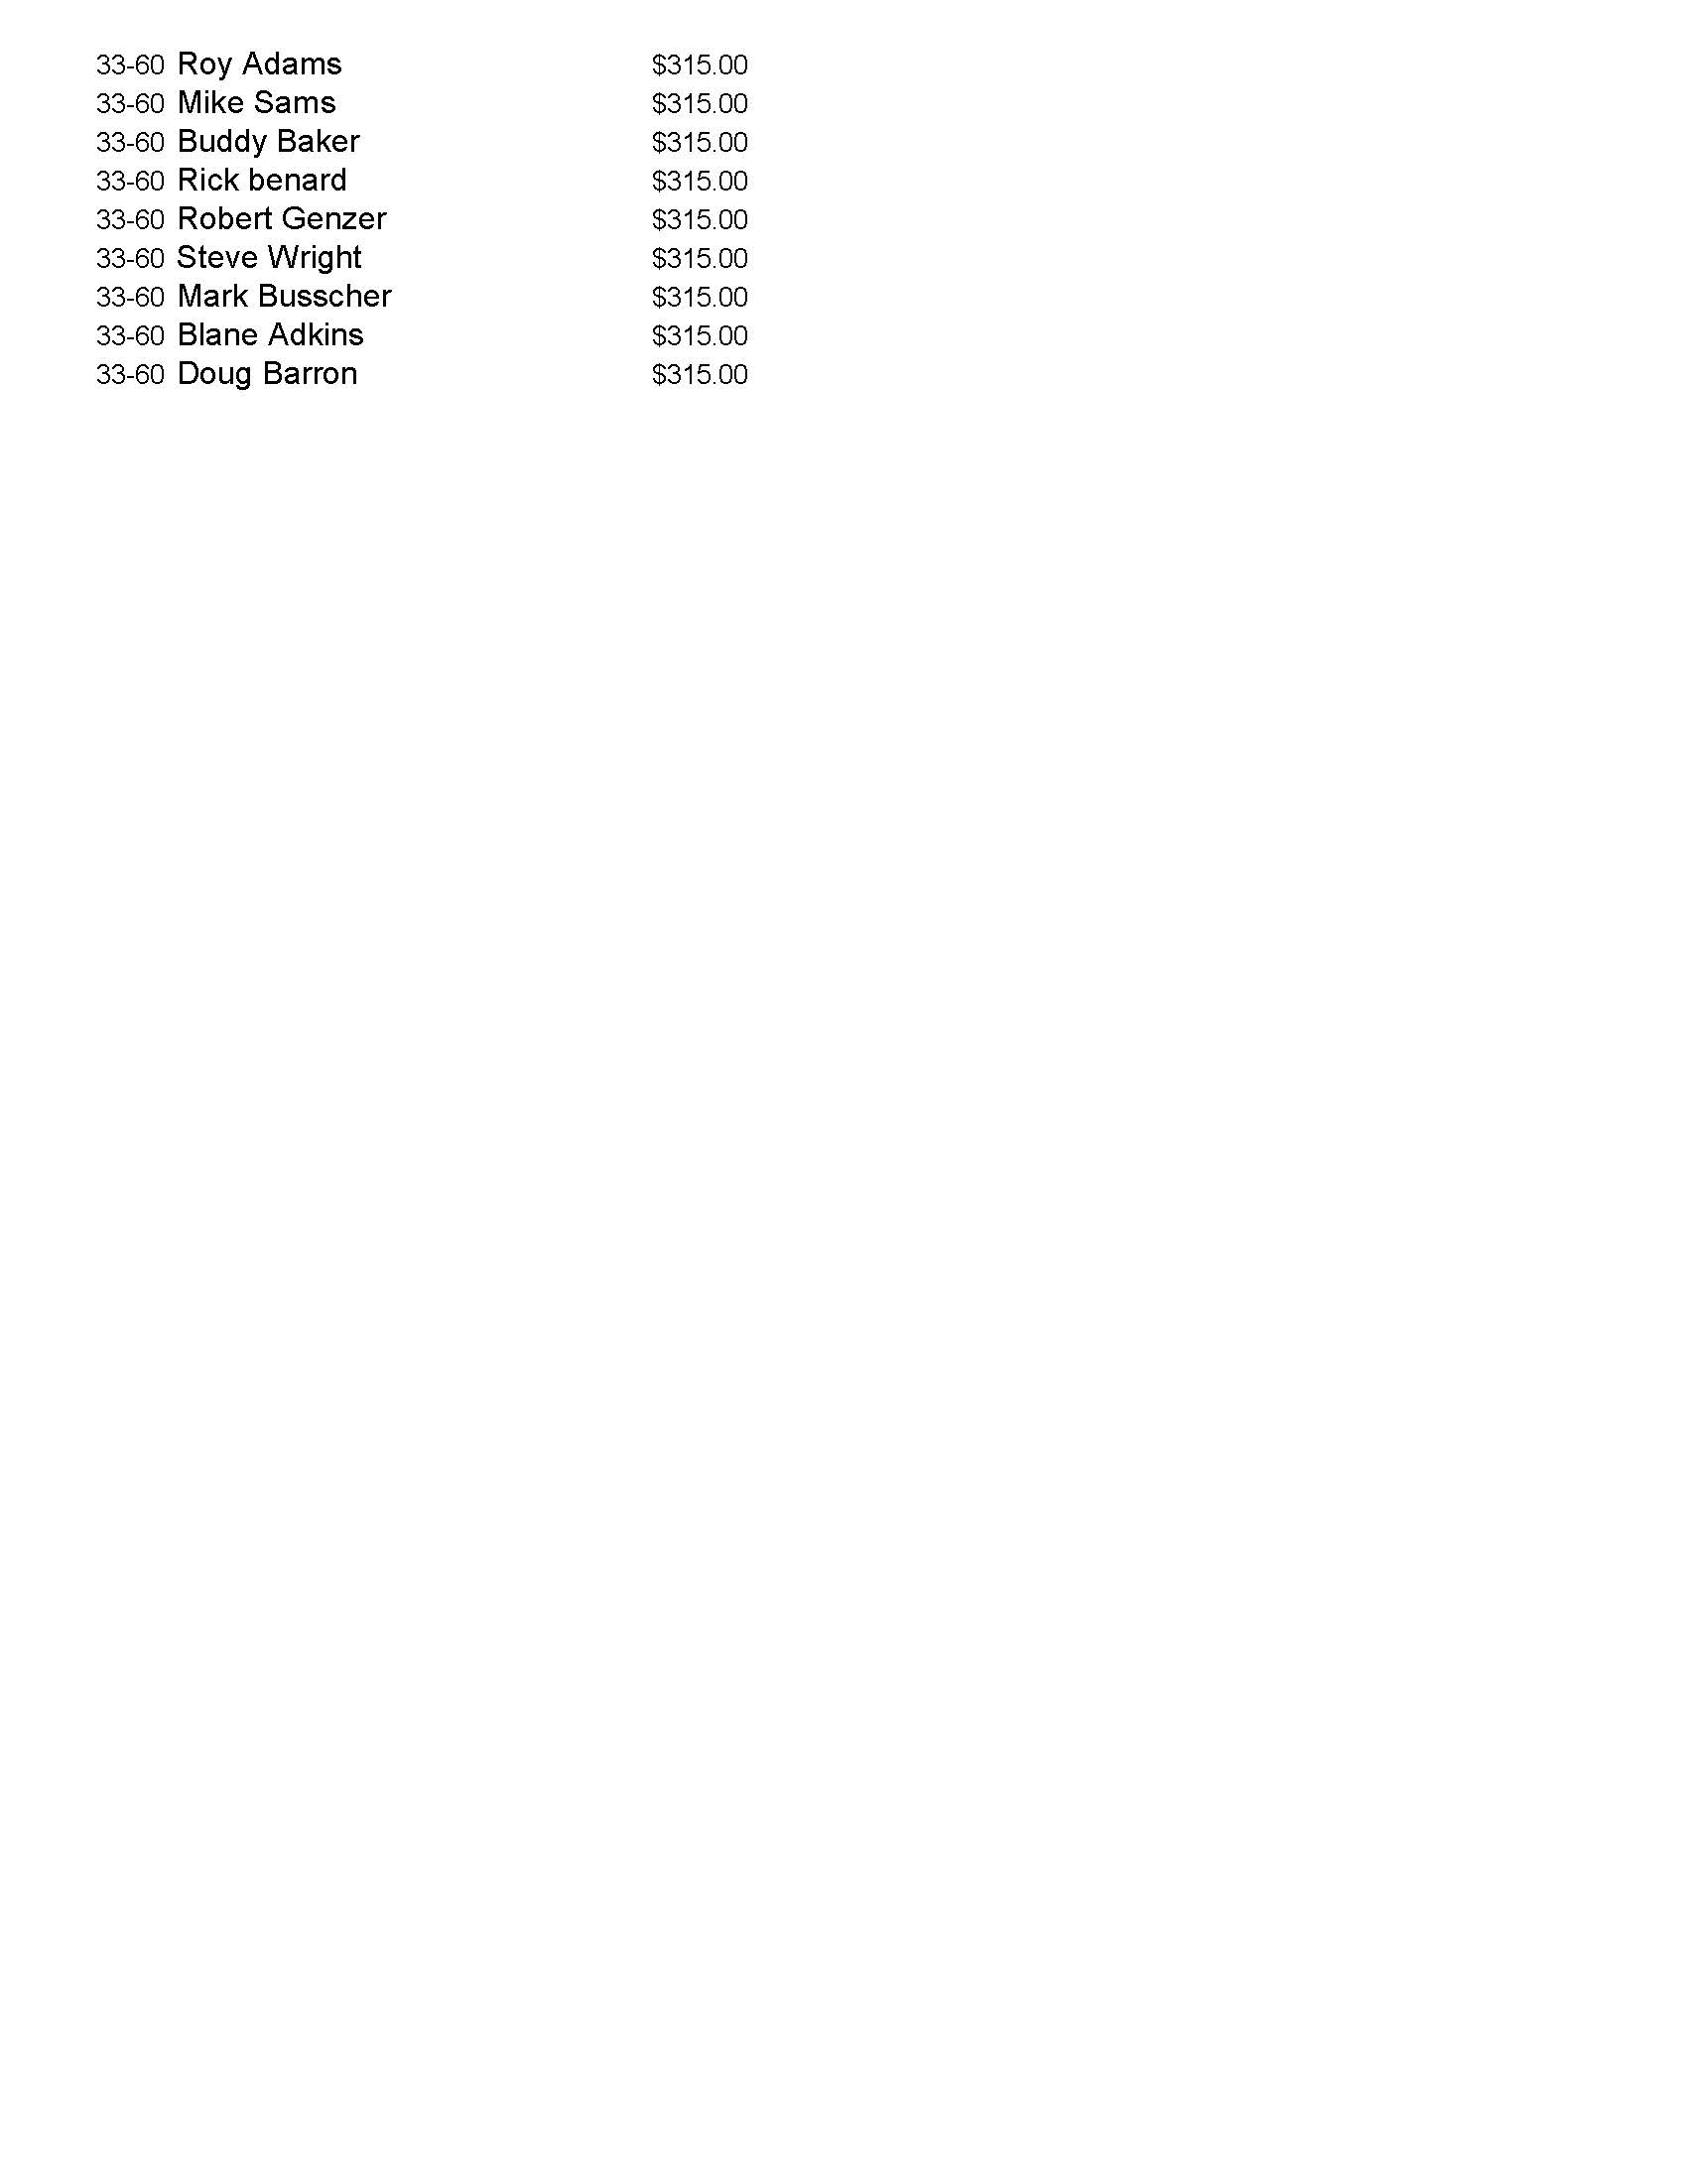 10042020results_Page_2